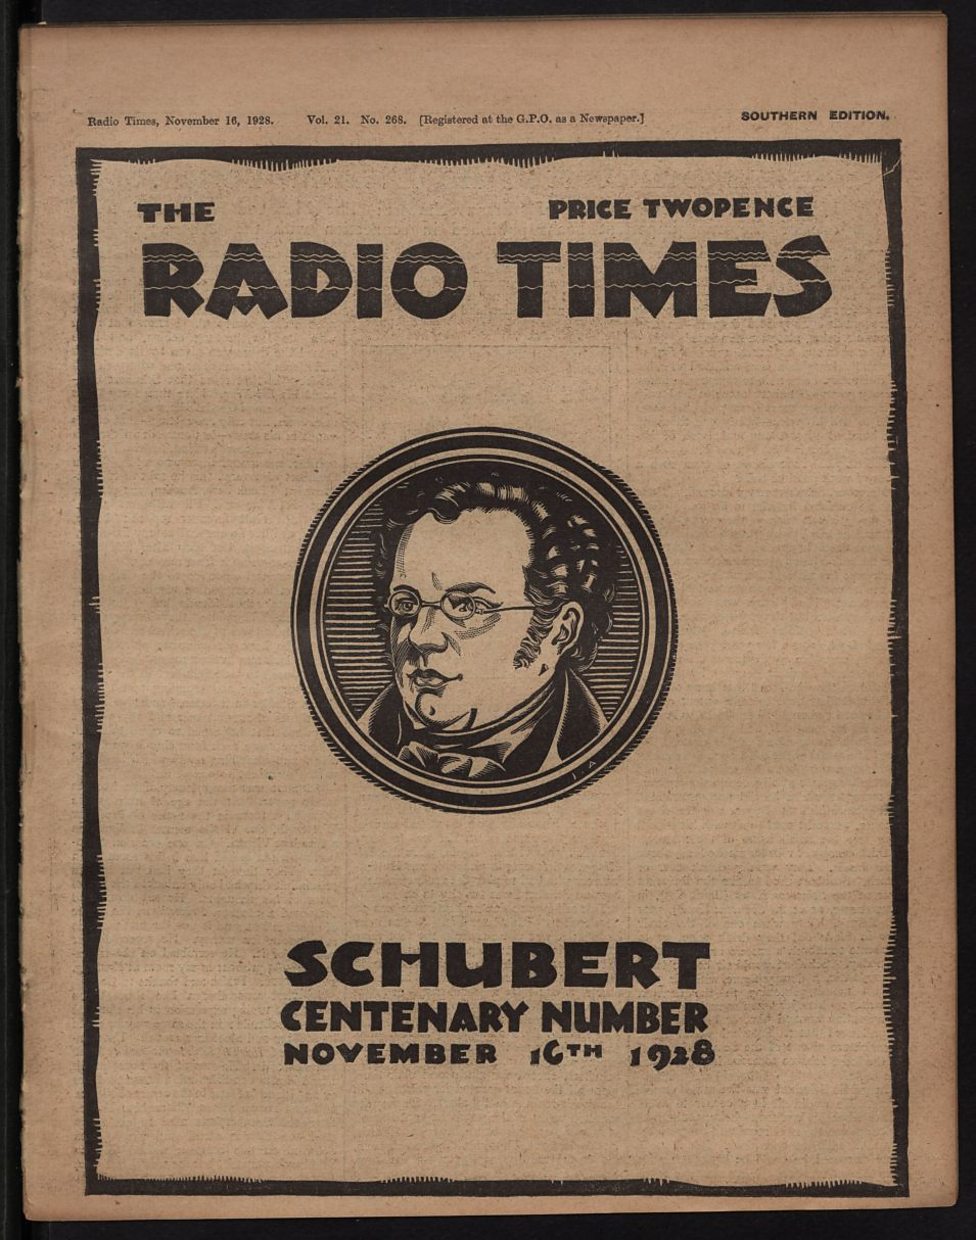 BBC Radio 3 - Composer of the Week, Franz Schubert (1797-1828), Schubert on  the cover of Radio Times